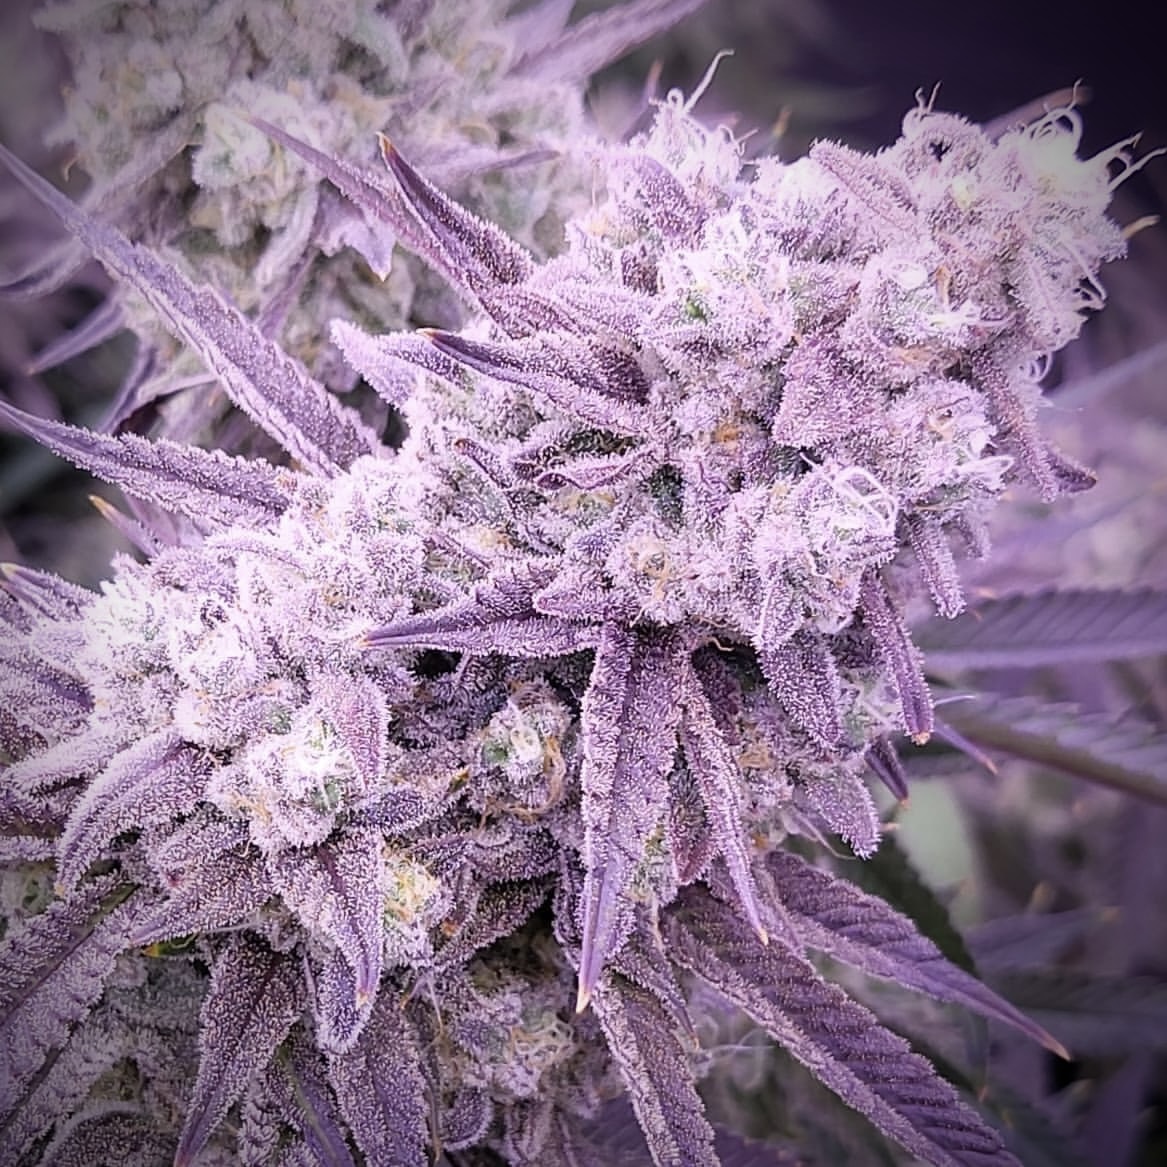 Check out this amazing grow by @reaper_the_copy_cat using the Kind LED X² Grow Light! 💡 With advanced spectrum control and energy efficiency, the X² helped achieve incredible yields and vibrant, healthy plants from seed to harvest. 🛒 Shop KIND: bit.ly/KINDLED